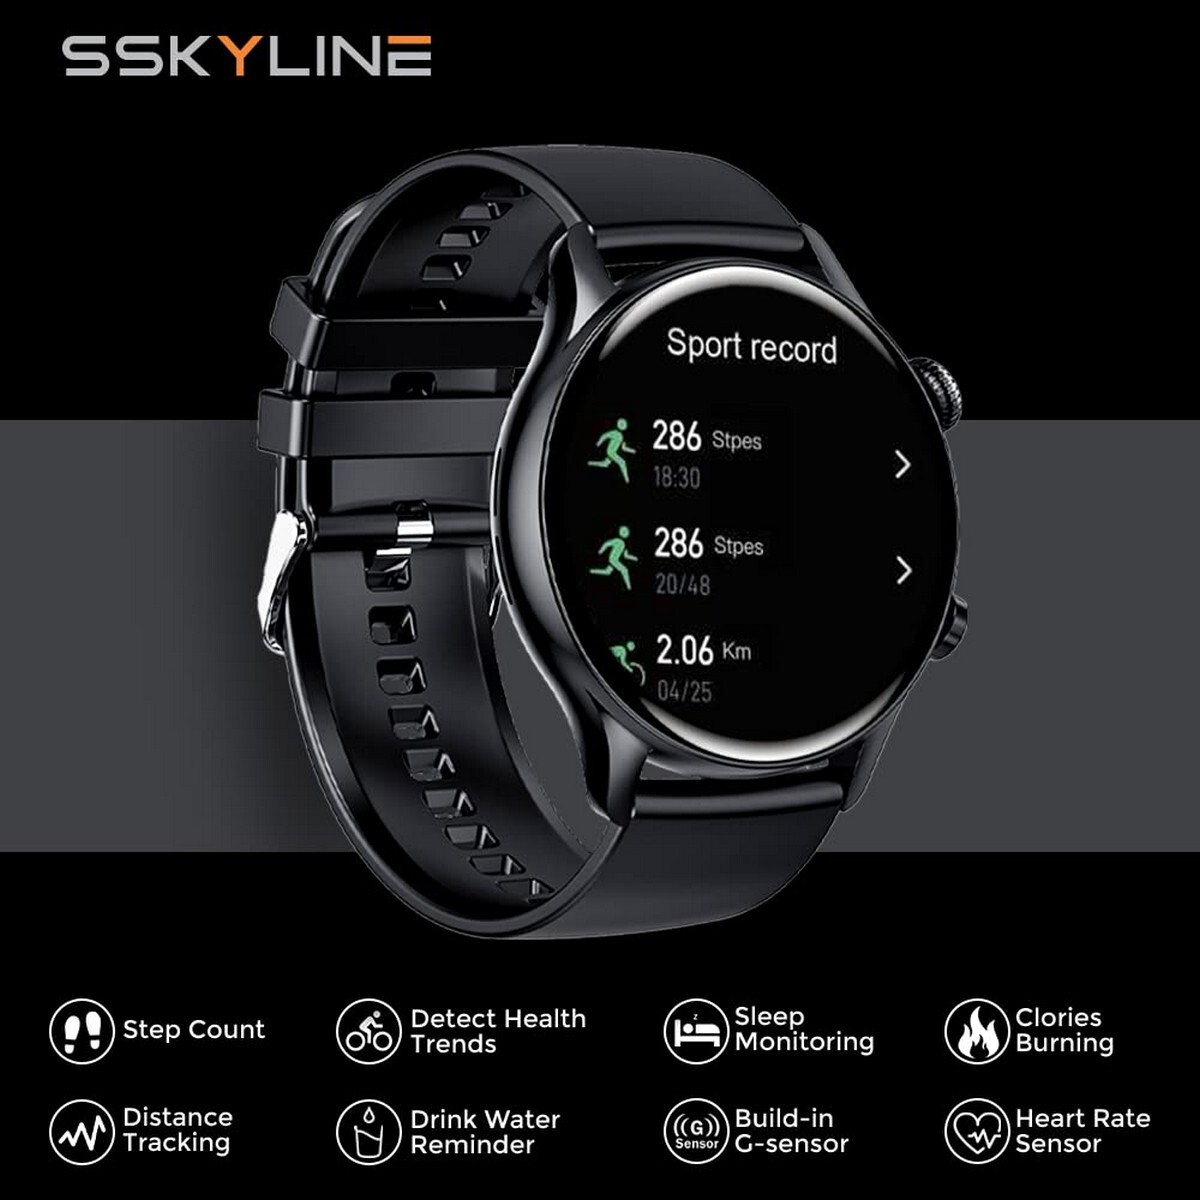 Corseca Just Sskyline 1.3-inch AMOLED Display with 360x360 Resolution and a 300mAh Battery Capacity Smart Watch